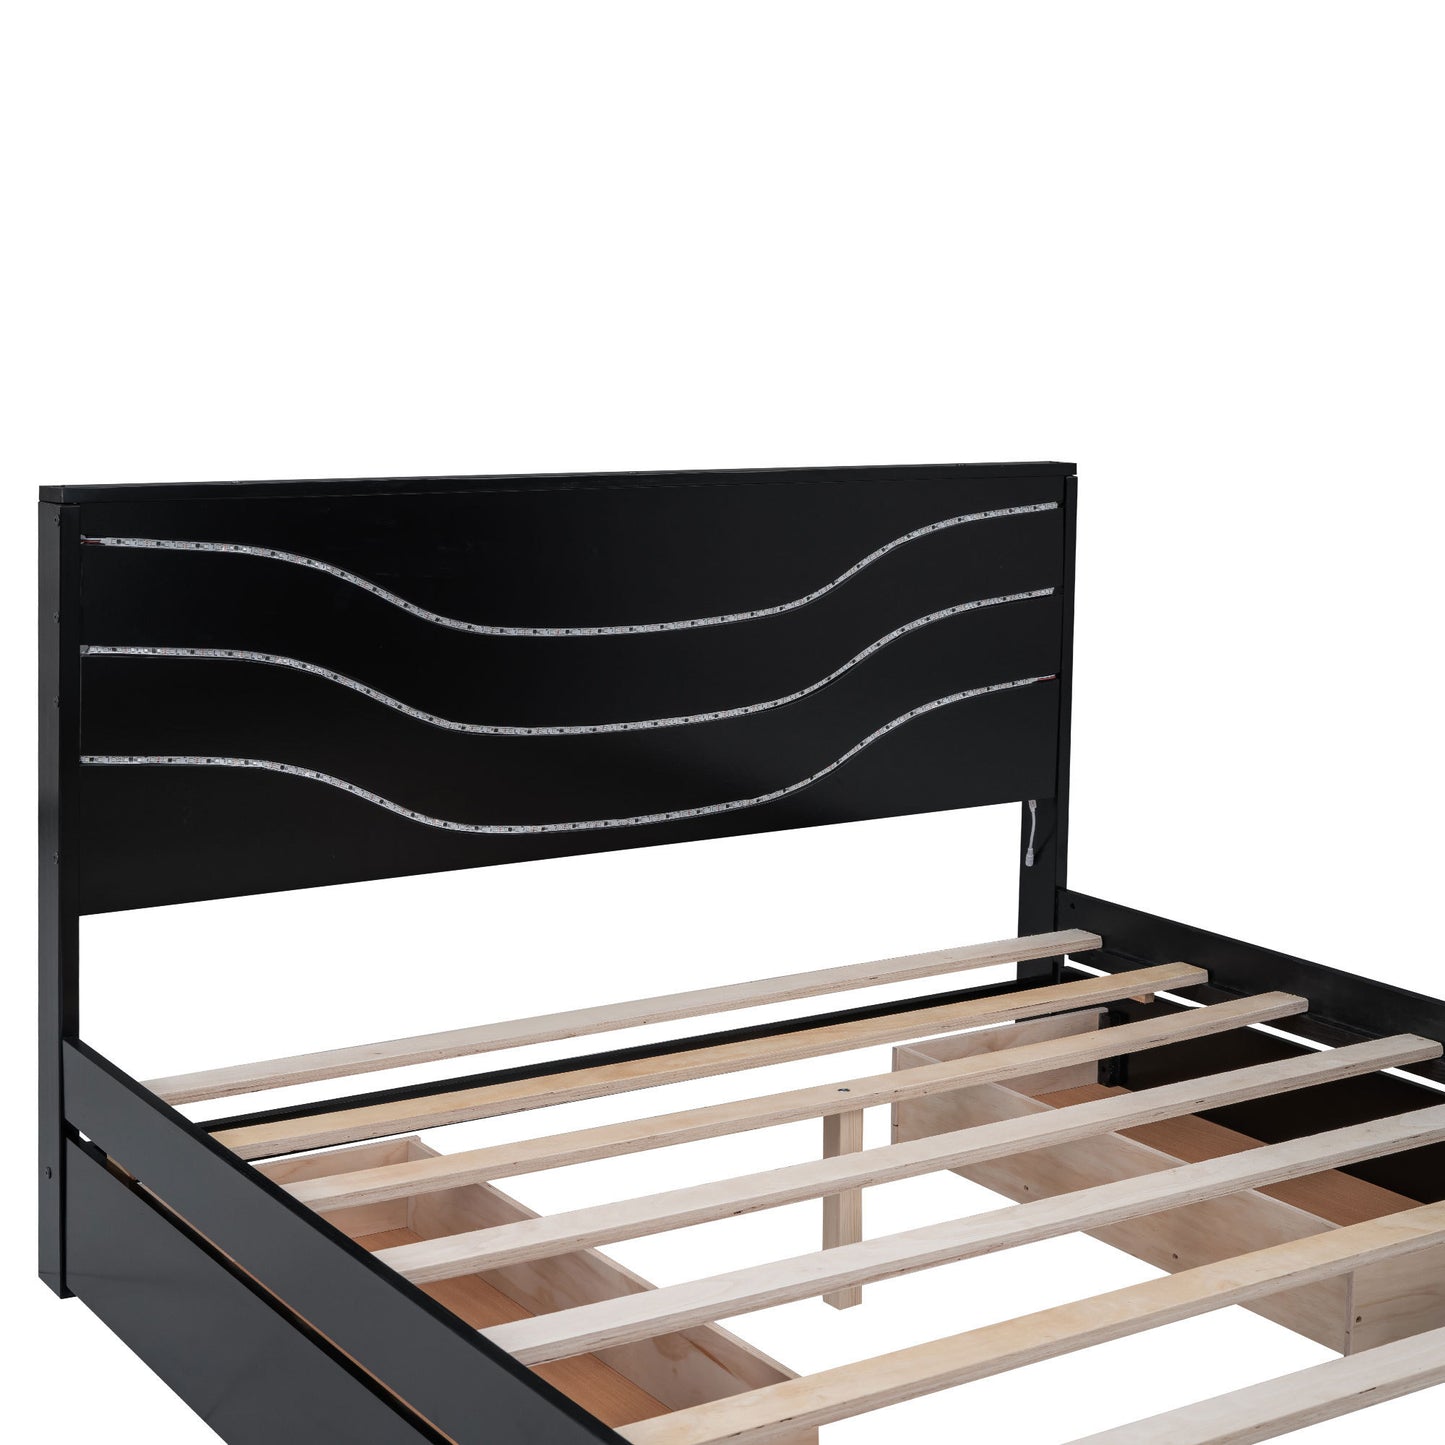 Queen Size Wood Storage Platform Bed with LED and 4 Drawers, Black